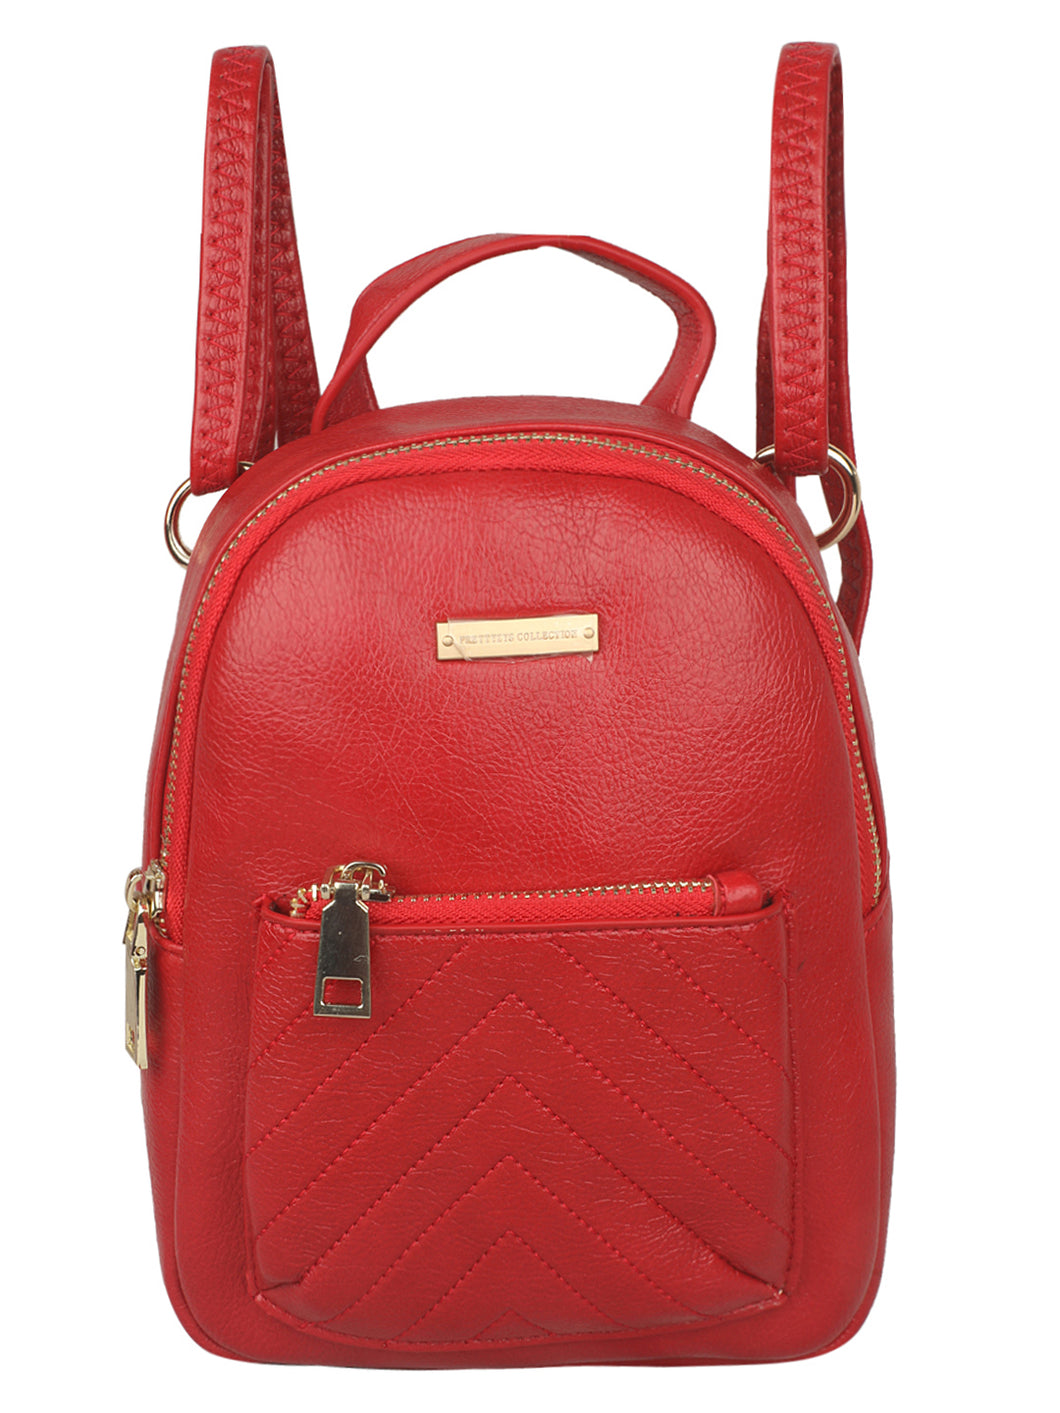 SUPER SLEEK TINY BRIGHT RED CASUAL BACKPACK